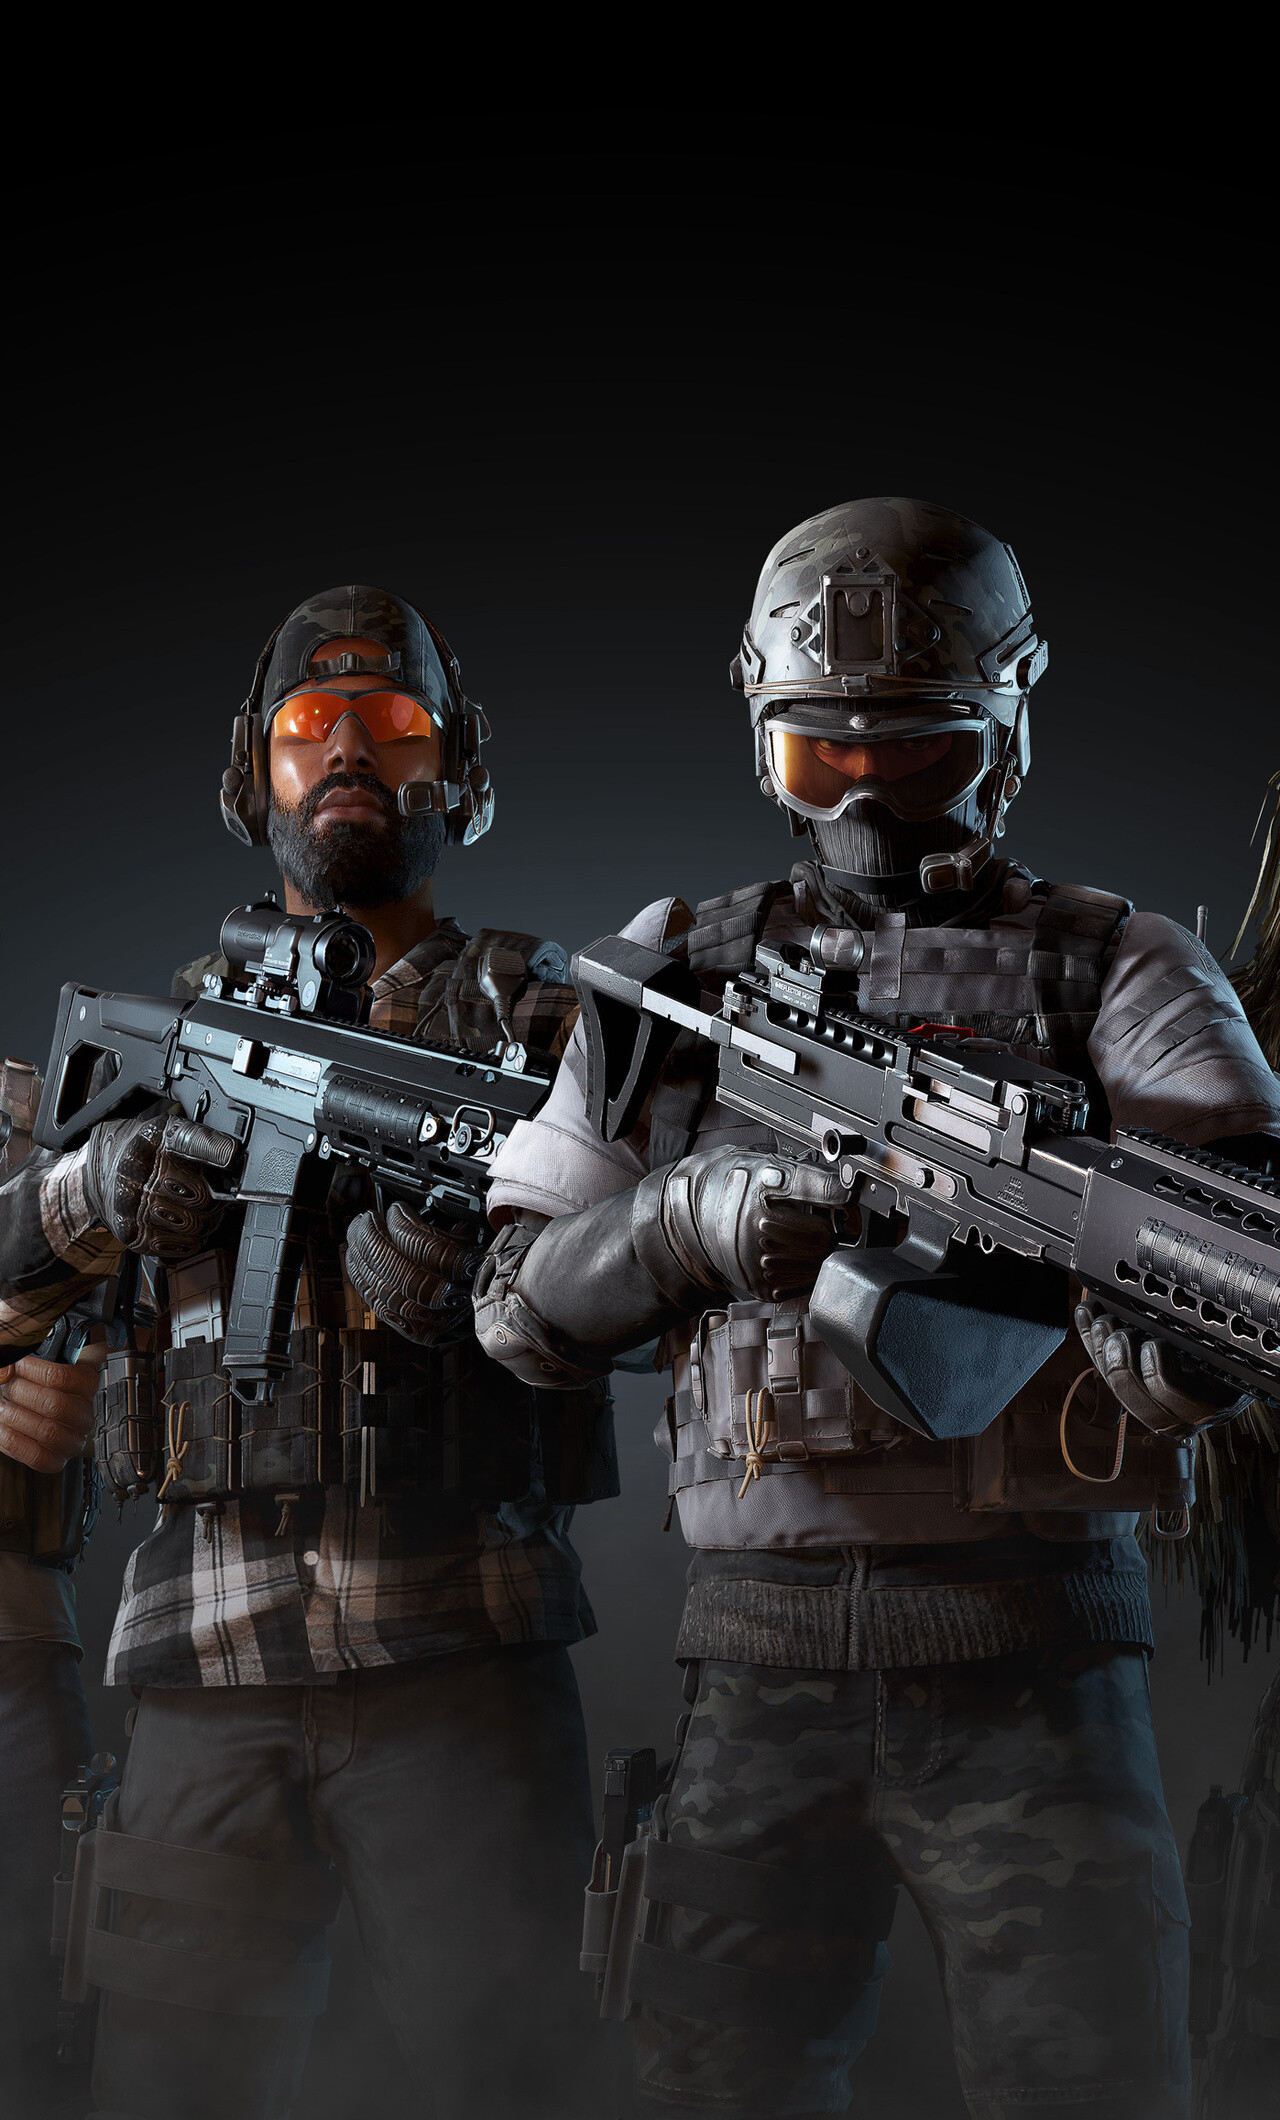 Ghost Recon: Wildlands: Fireteam members, Tactical military gear, Weaver, Holt, The leading characters. 1280x2120 HD Wallpaper.